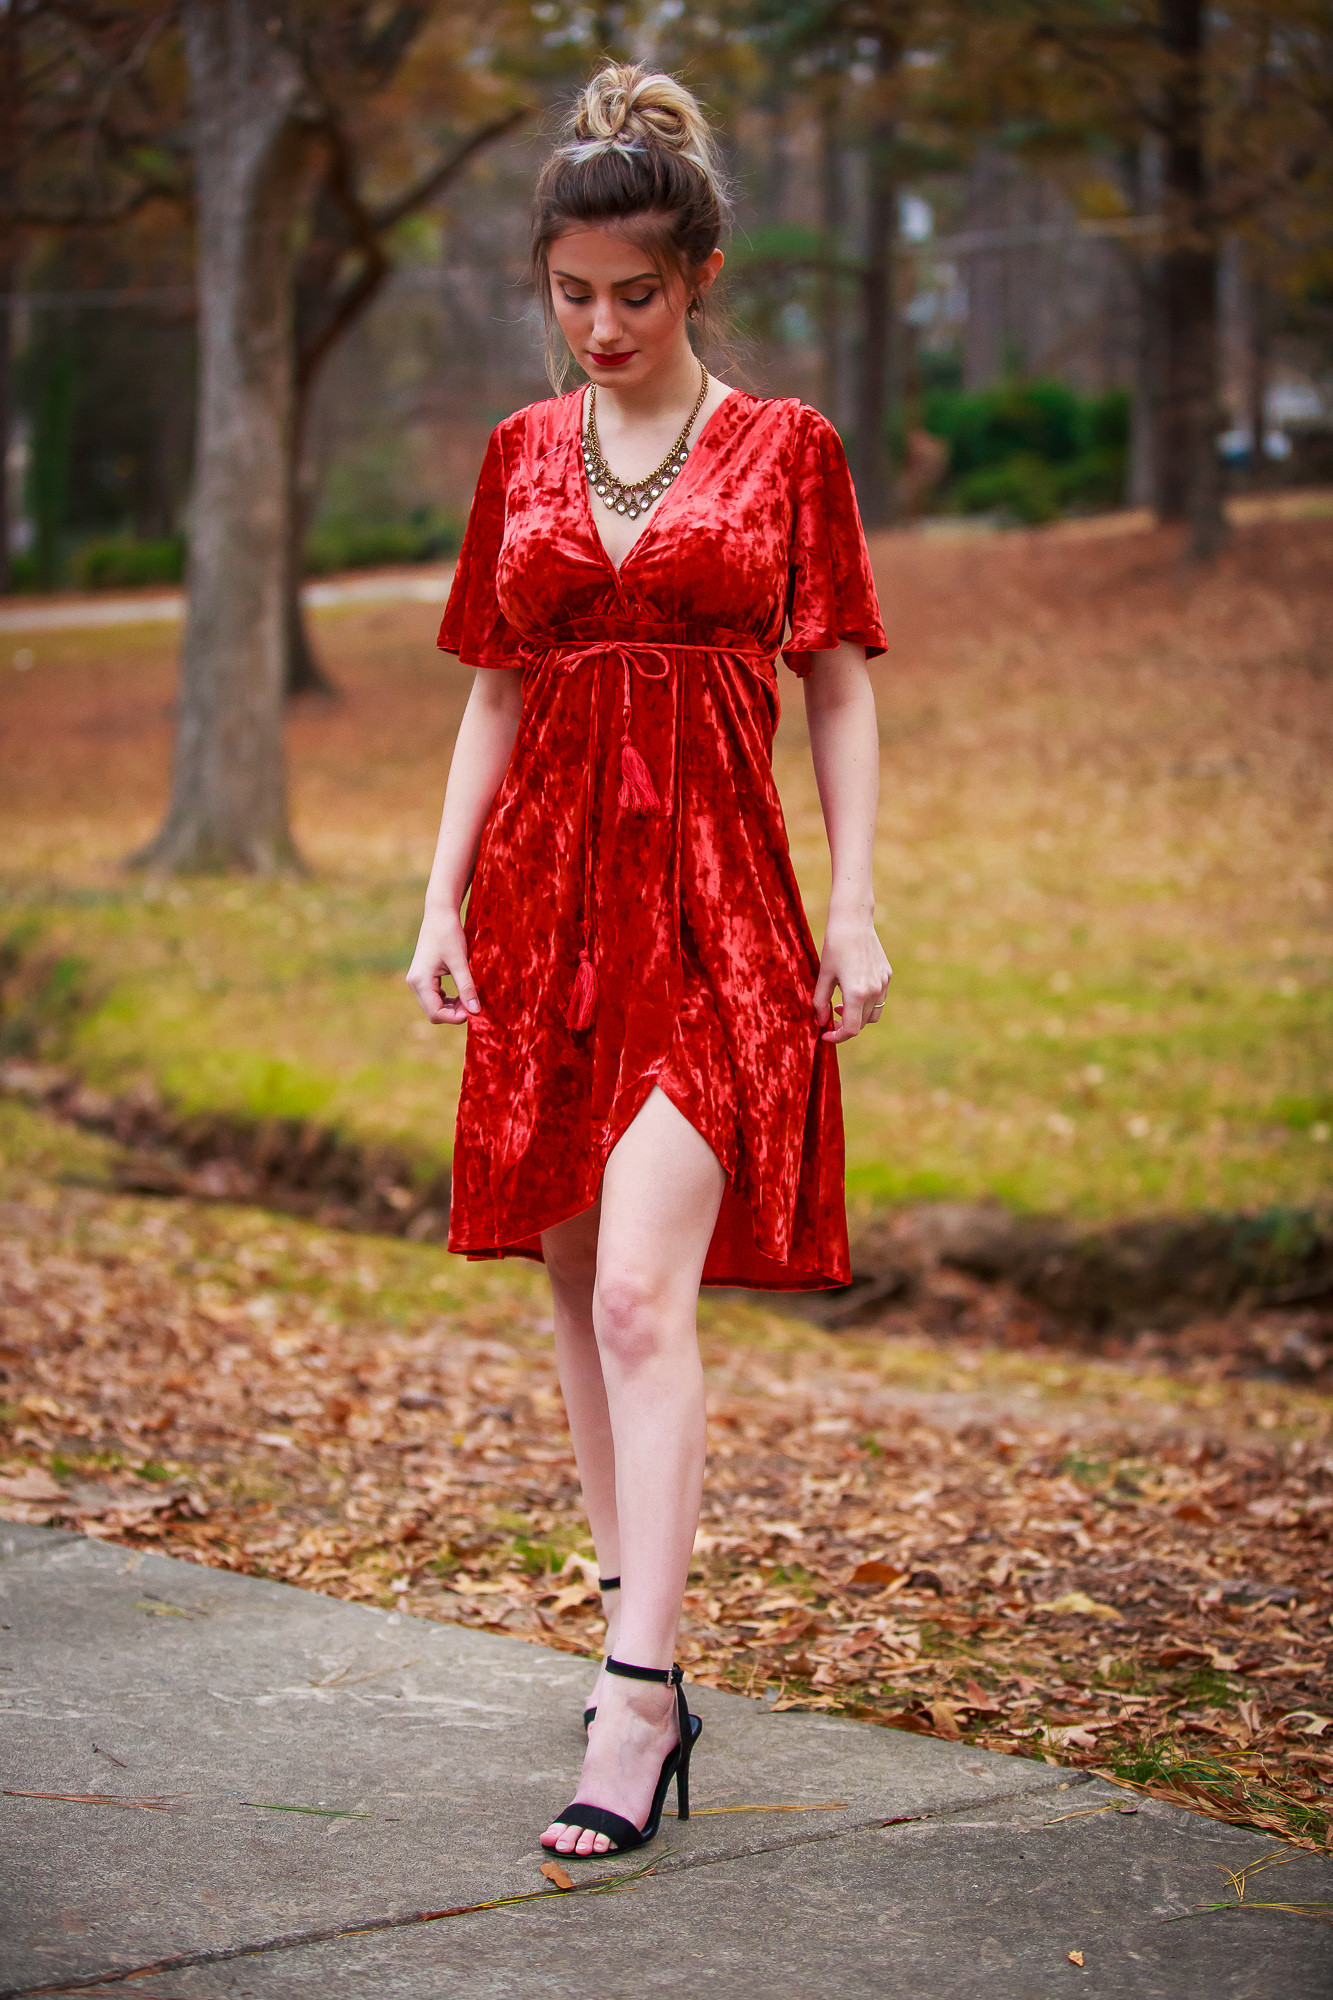 Christmas Holiday Party Outfit Ideas
 What to Wear to a Christmas Party